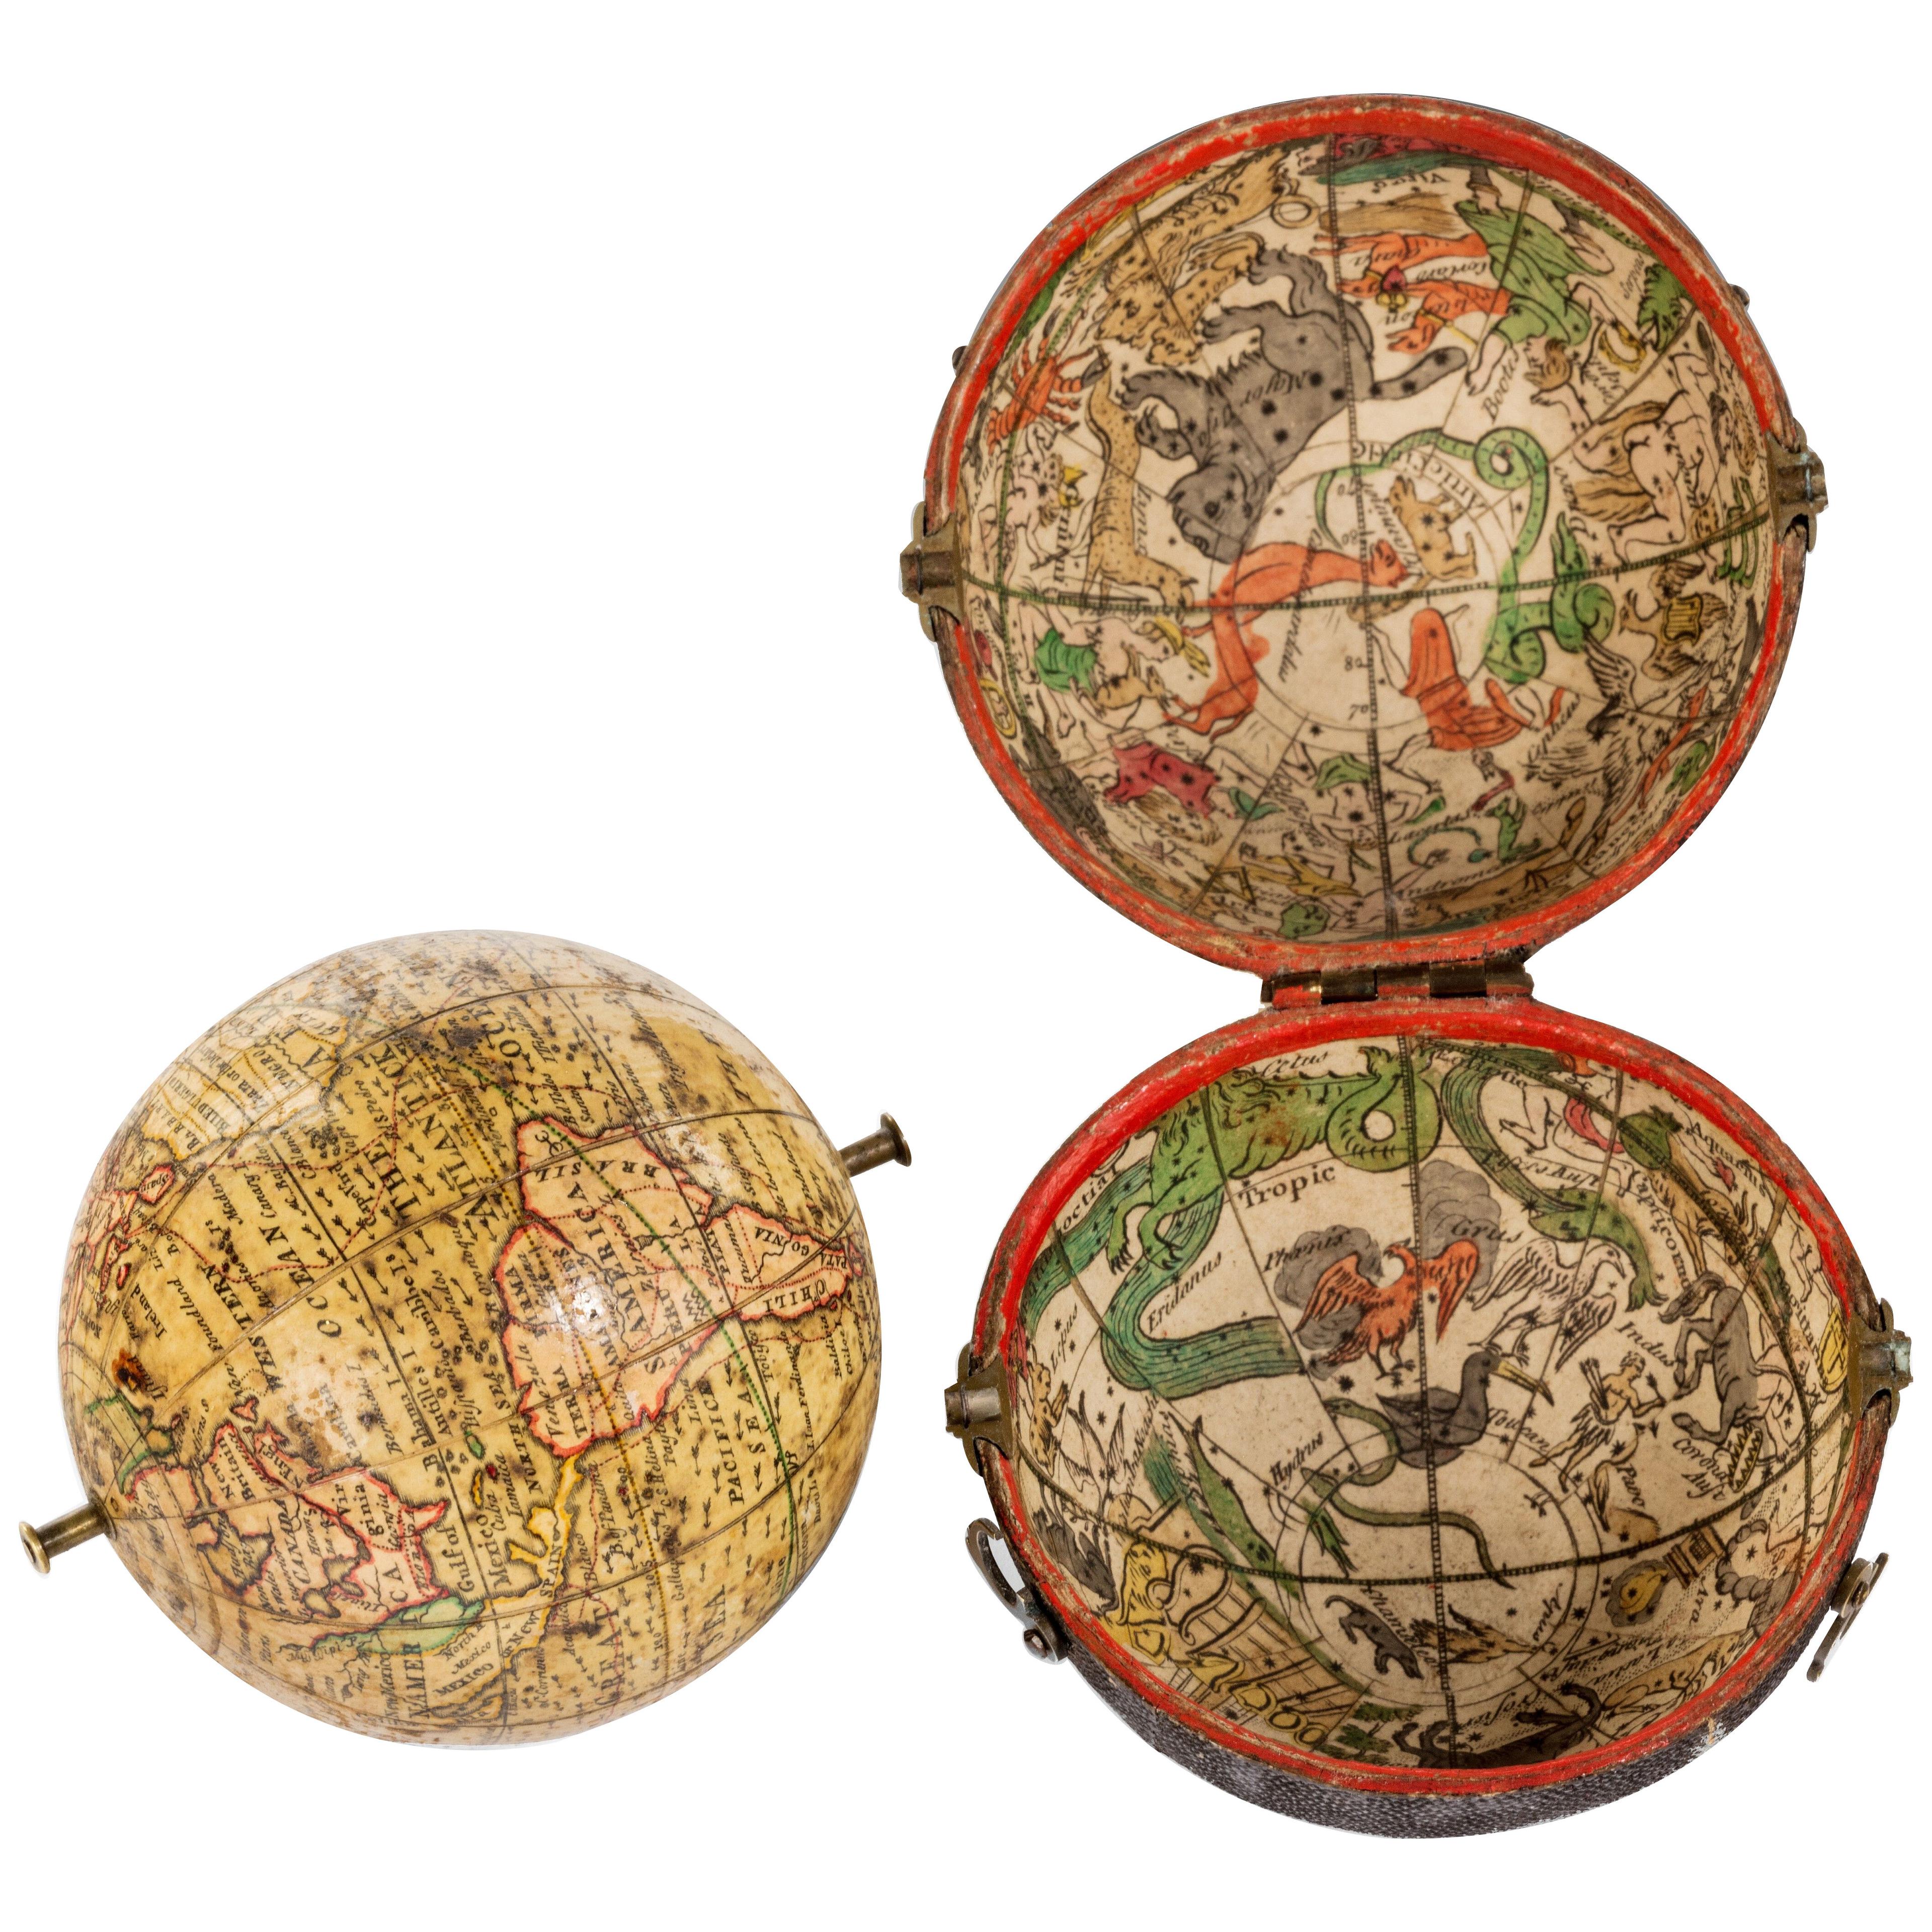  Pocket Globe and Case Published by Nathaniel Hill (fl.1746-68)